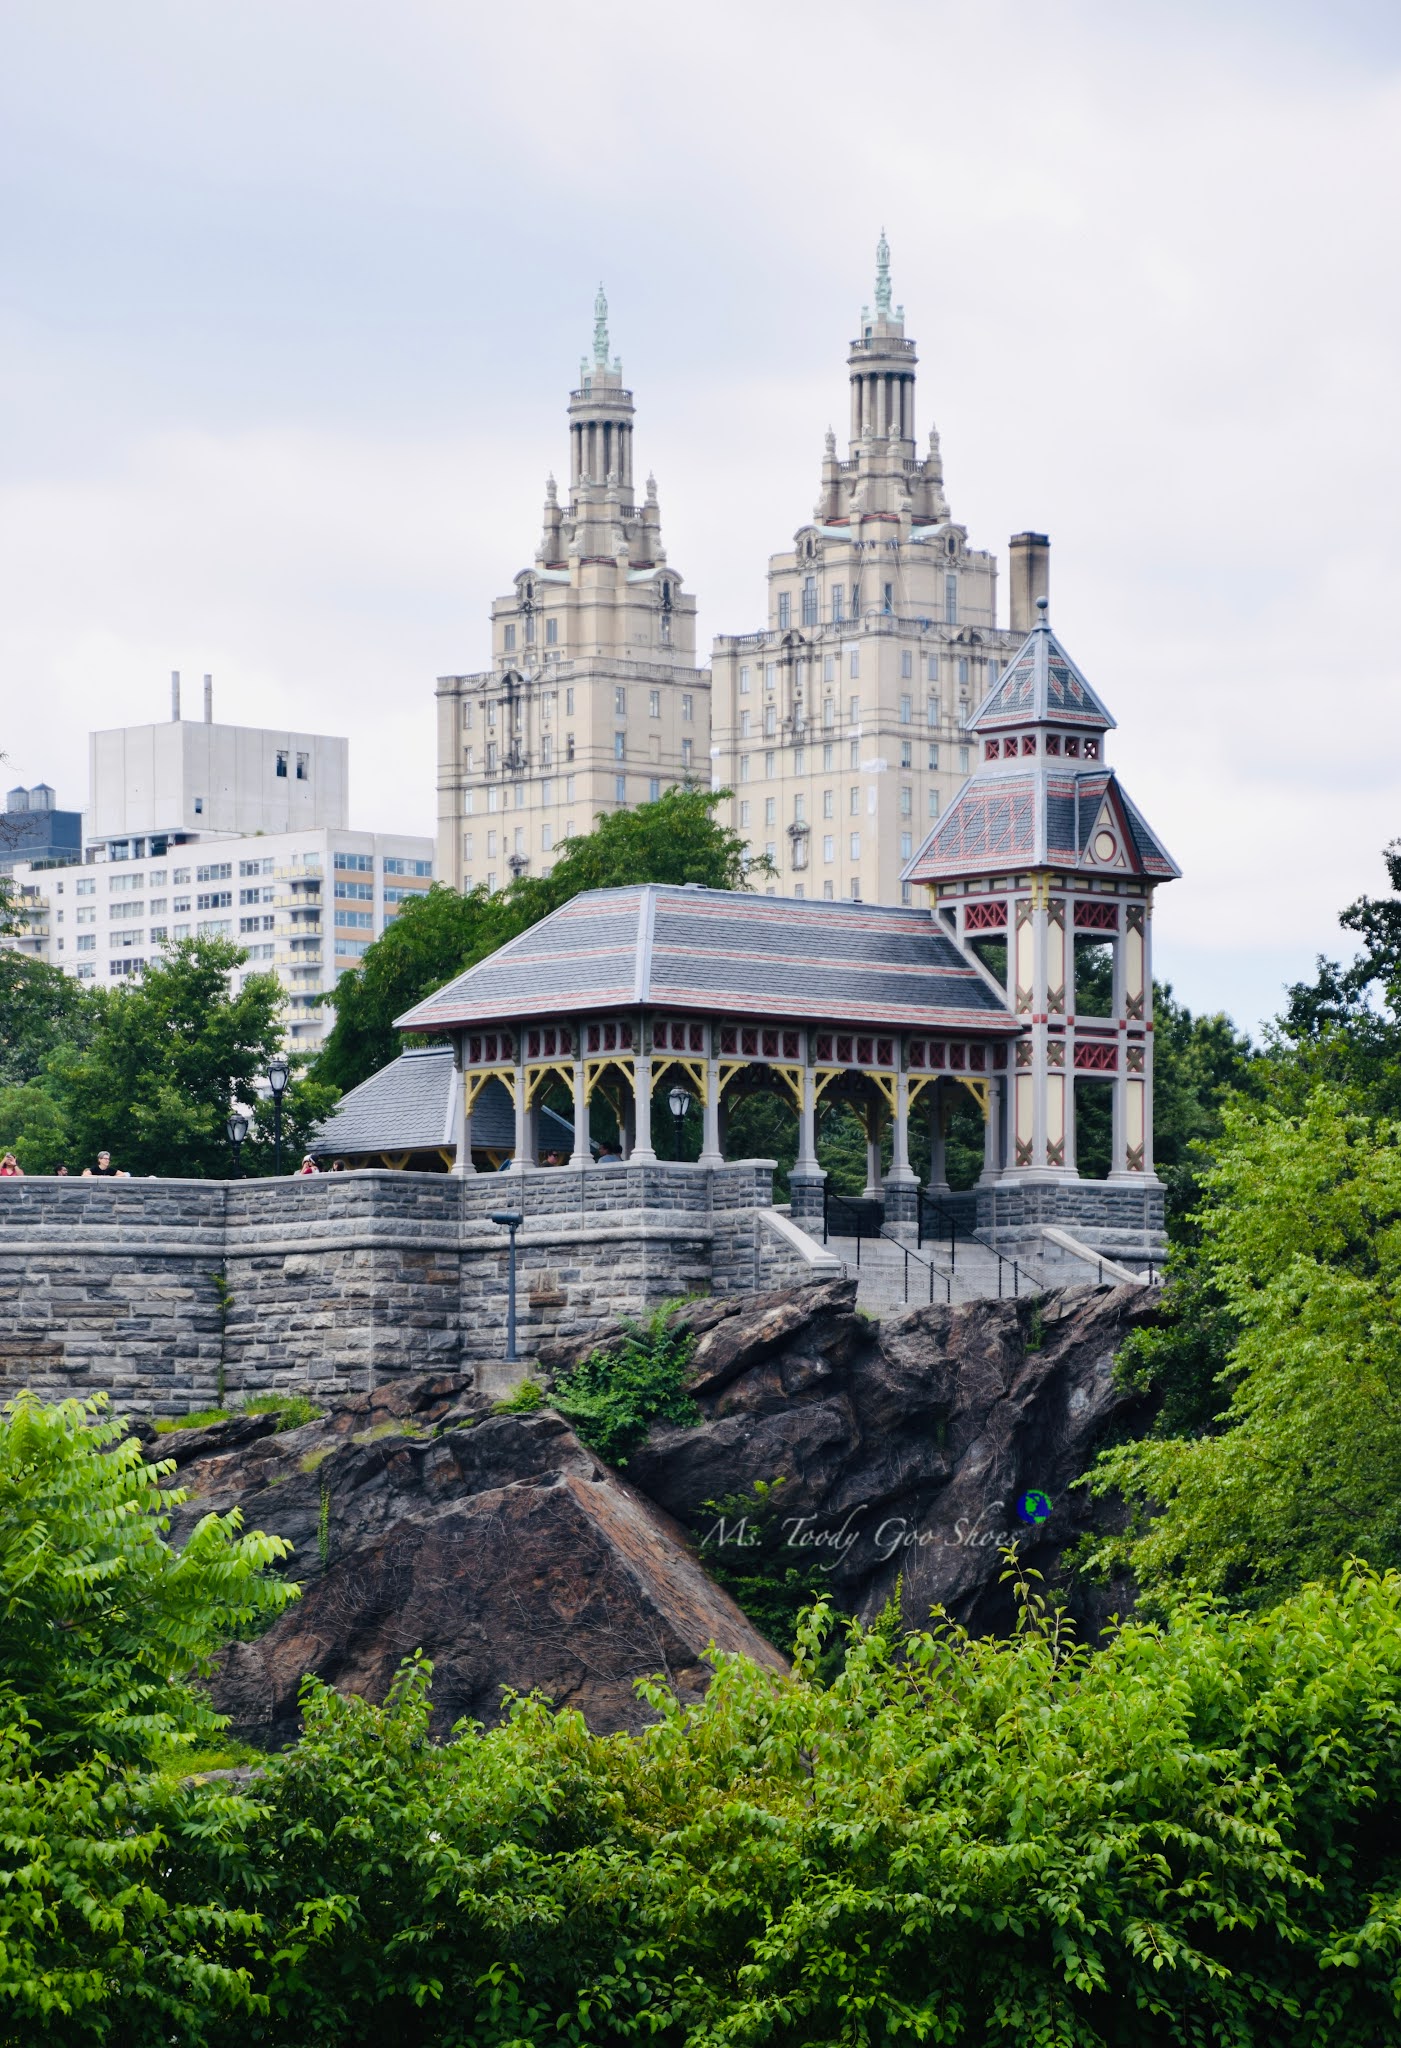 Turtle Pond and Belvedere Castle are two must-see spots to visit in Central Park, New York | Ms. Toody Goo Shoes